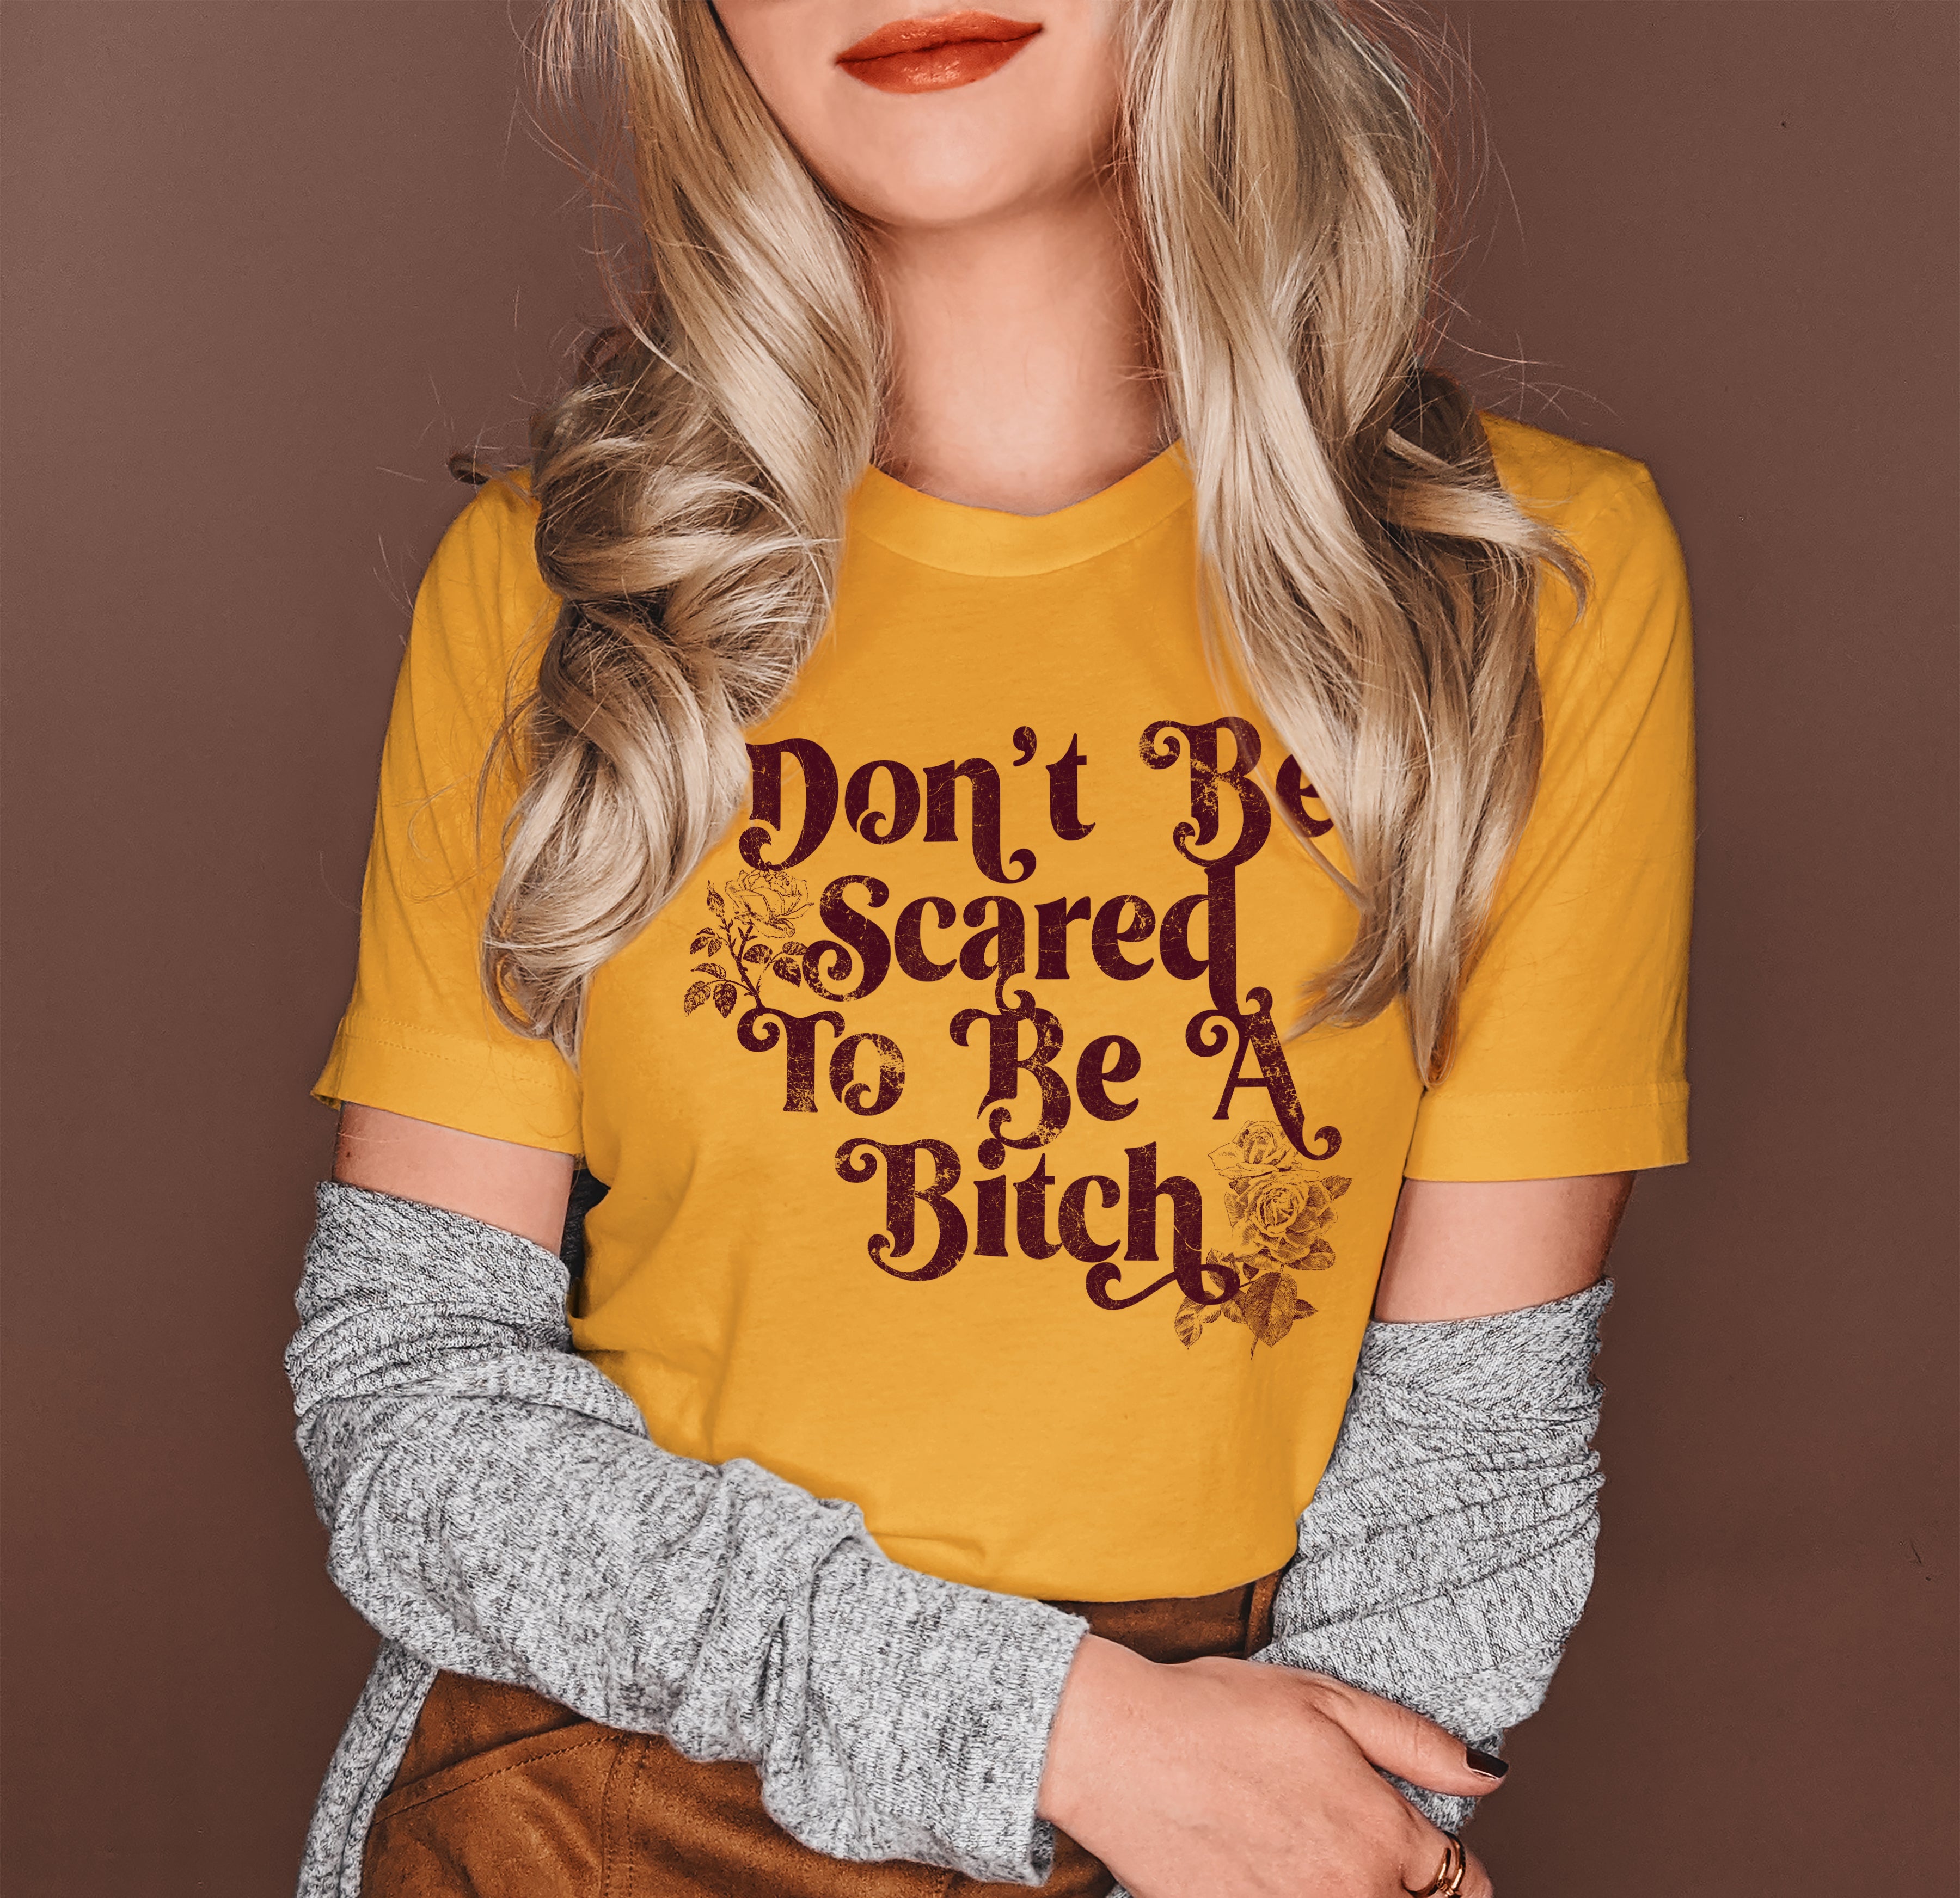 Funny retro shirt that says don't be scared to be a bitch - HighCiti